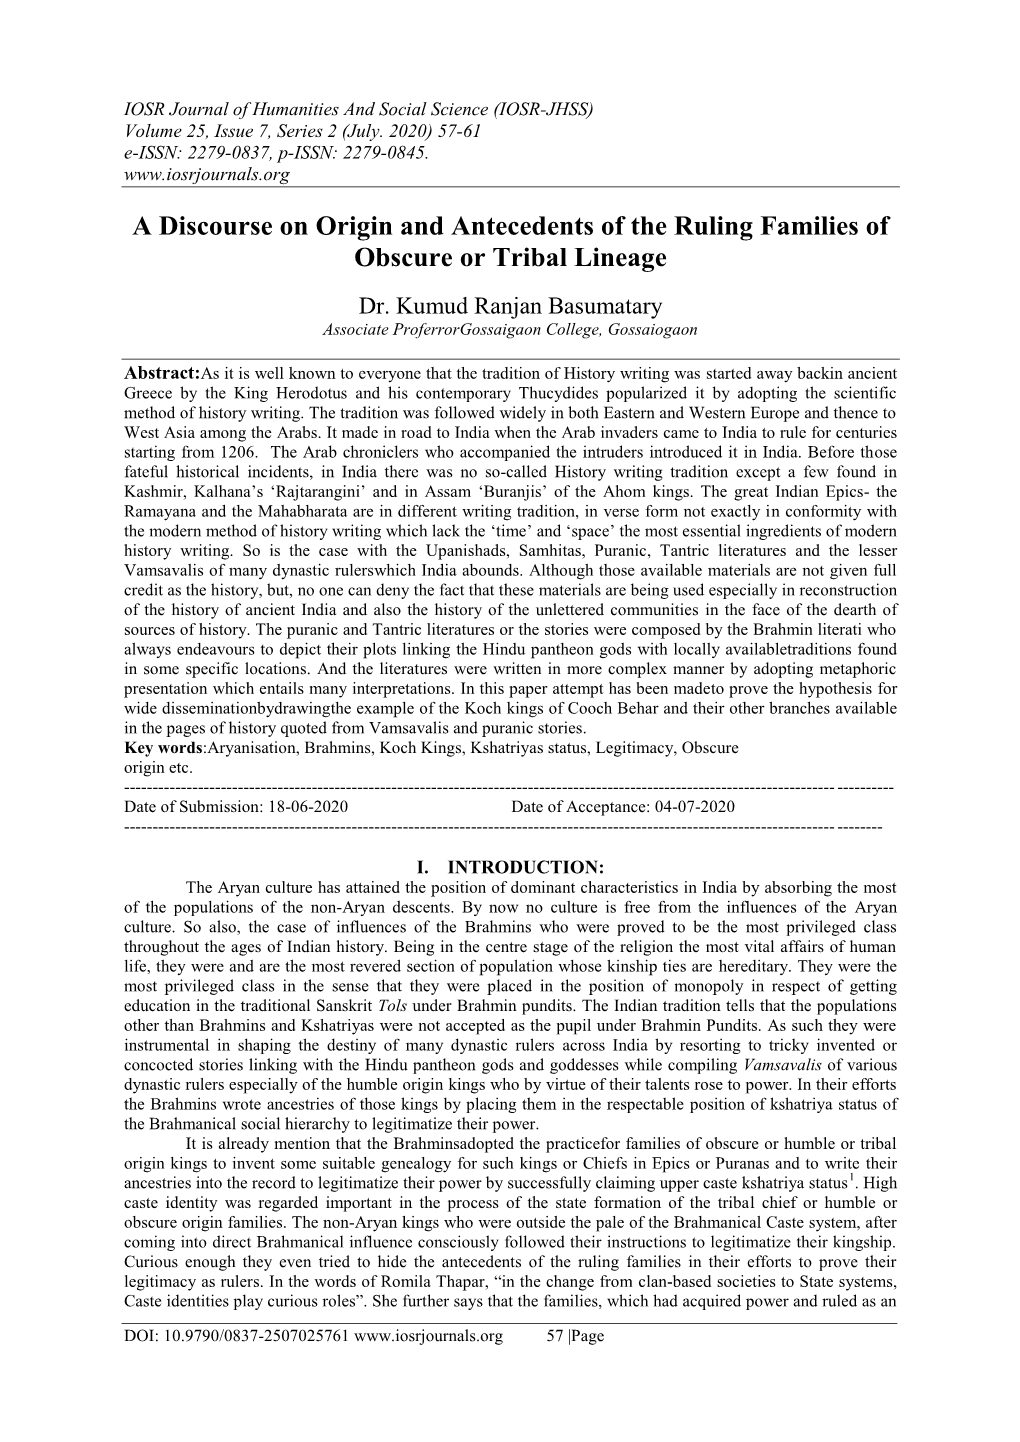 A Discourse on Origin and Antecedents of the Ruling Families of Obscure Or Tribal Lineage